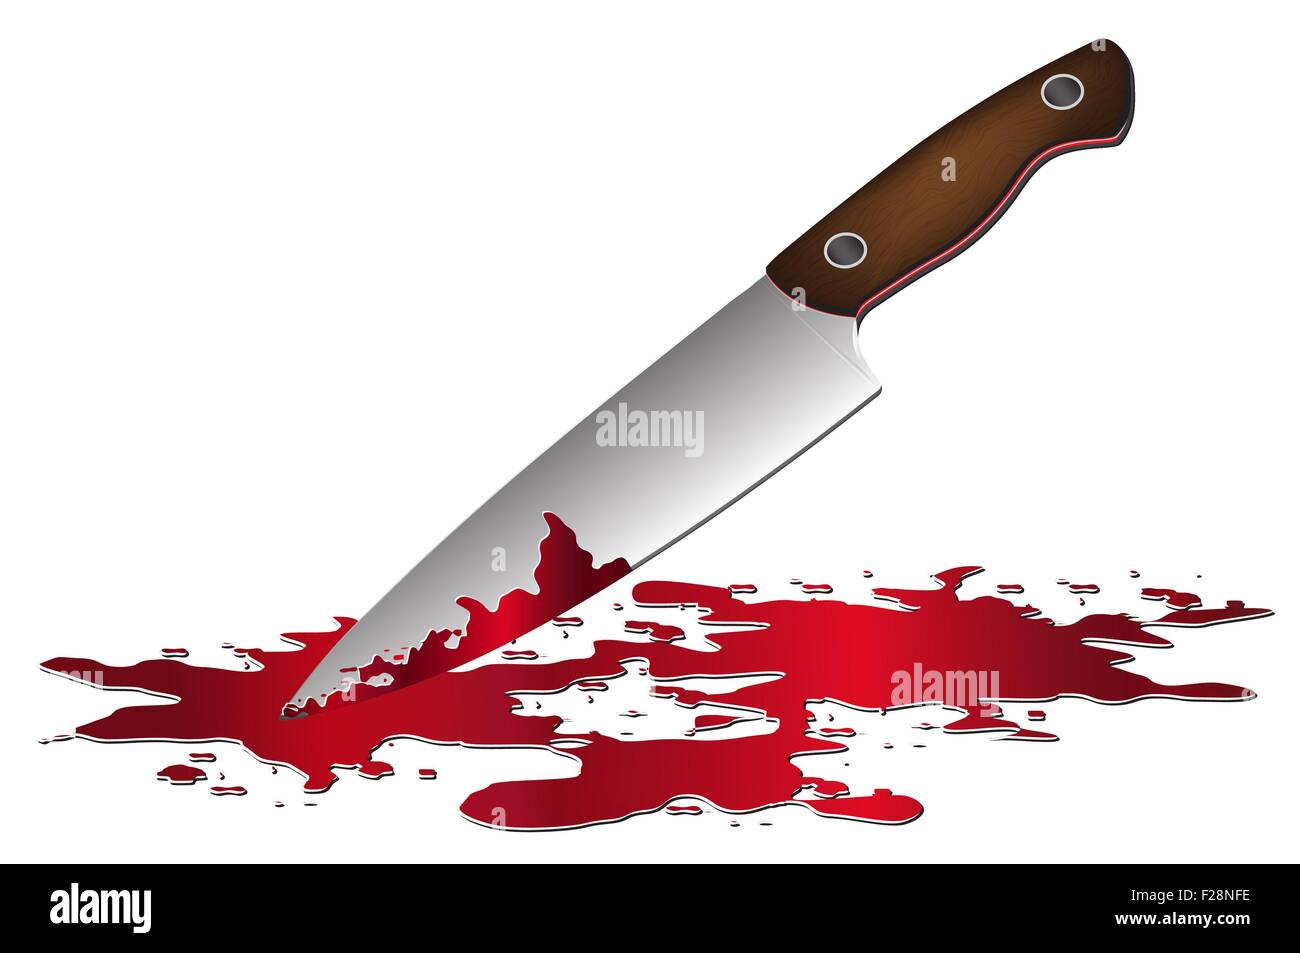 https://c8.alamy.com/comp/F28NFE/realistic-bloody-knife-knife-with-blood-vector-illustration-F28NFE.jpg